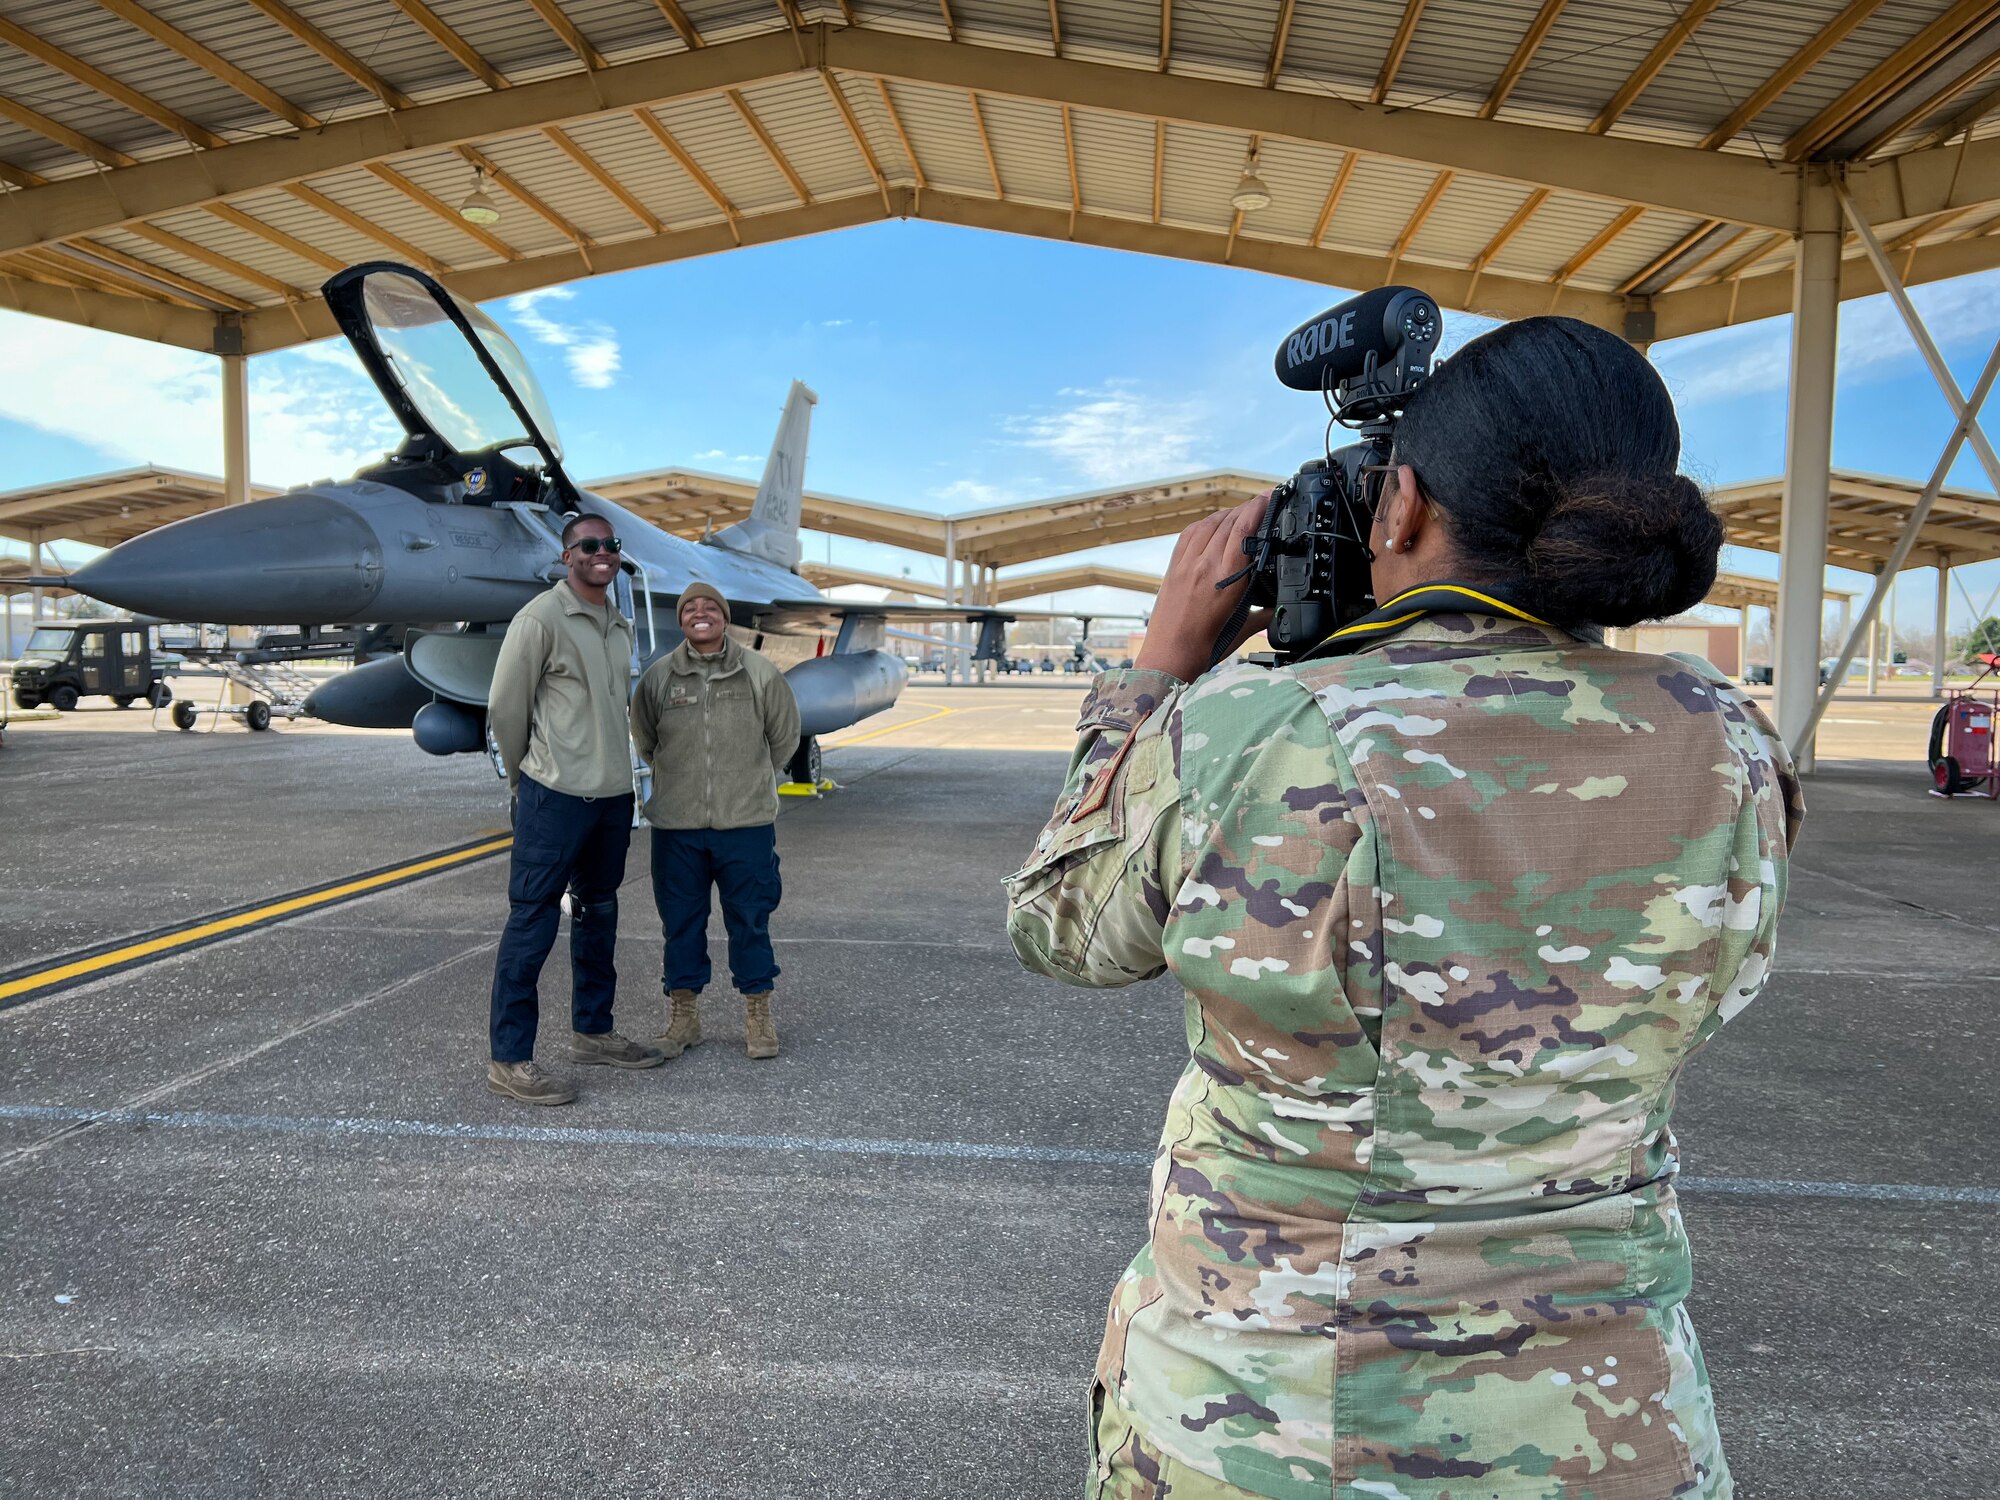 Staff Sgt. Nije Hightower, 301st Fighter Wing Public Affairs Specialist, takes a photo of two crew chiefs at Barksdale Air Force Base, Louisiana on March 9, 2022. Hightower participated in joint public affairs training that involved logistics, such as coordination of collecting imagery or footage for a project and ensuring proper safety practices on the flightline are followed.